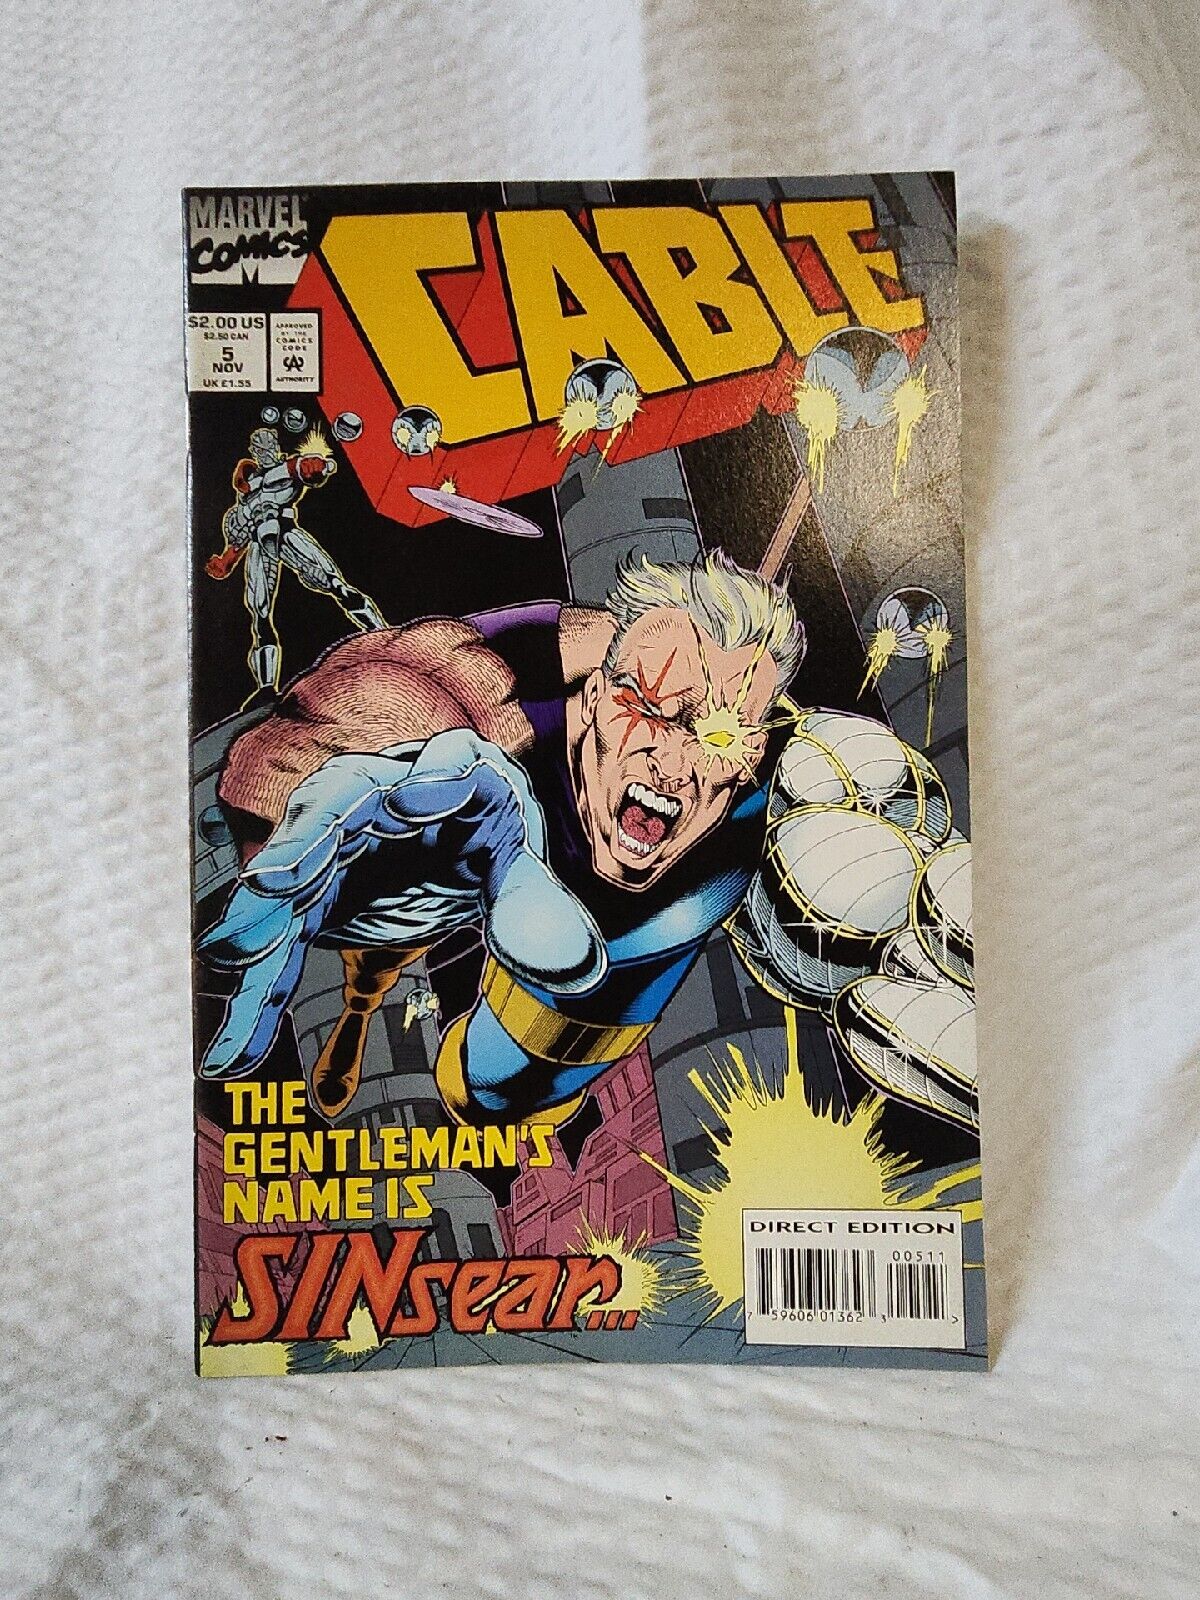 Marvel Comics Cable The Gentleman\'s Name is SINsear vol. 1 no. 5 July 1993